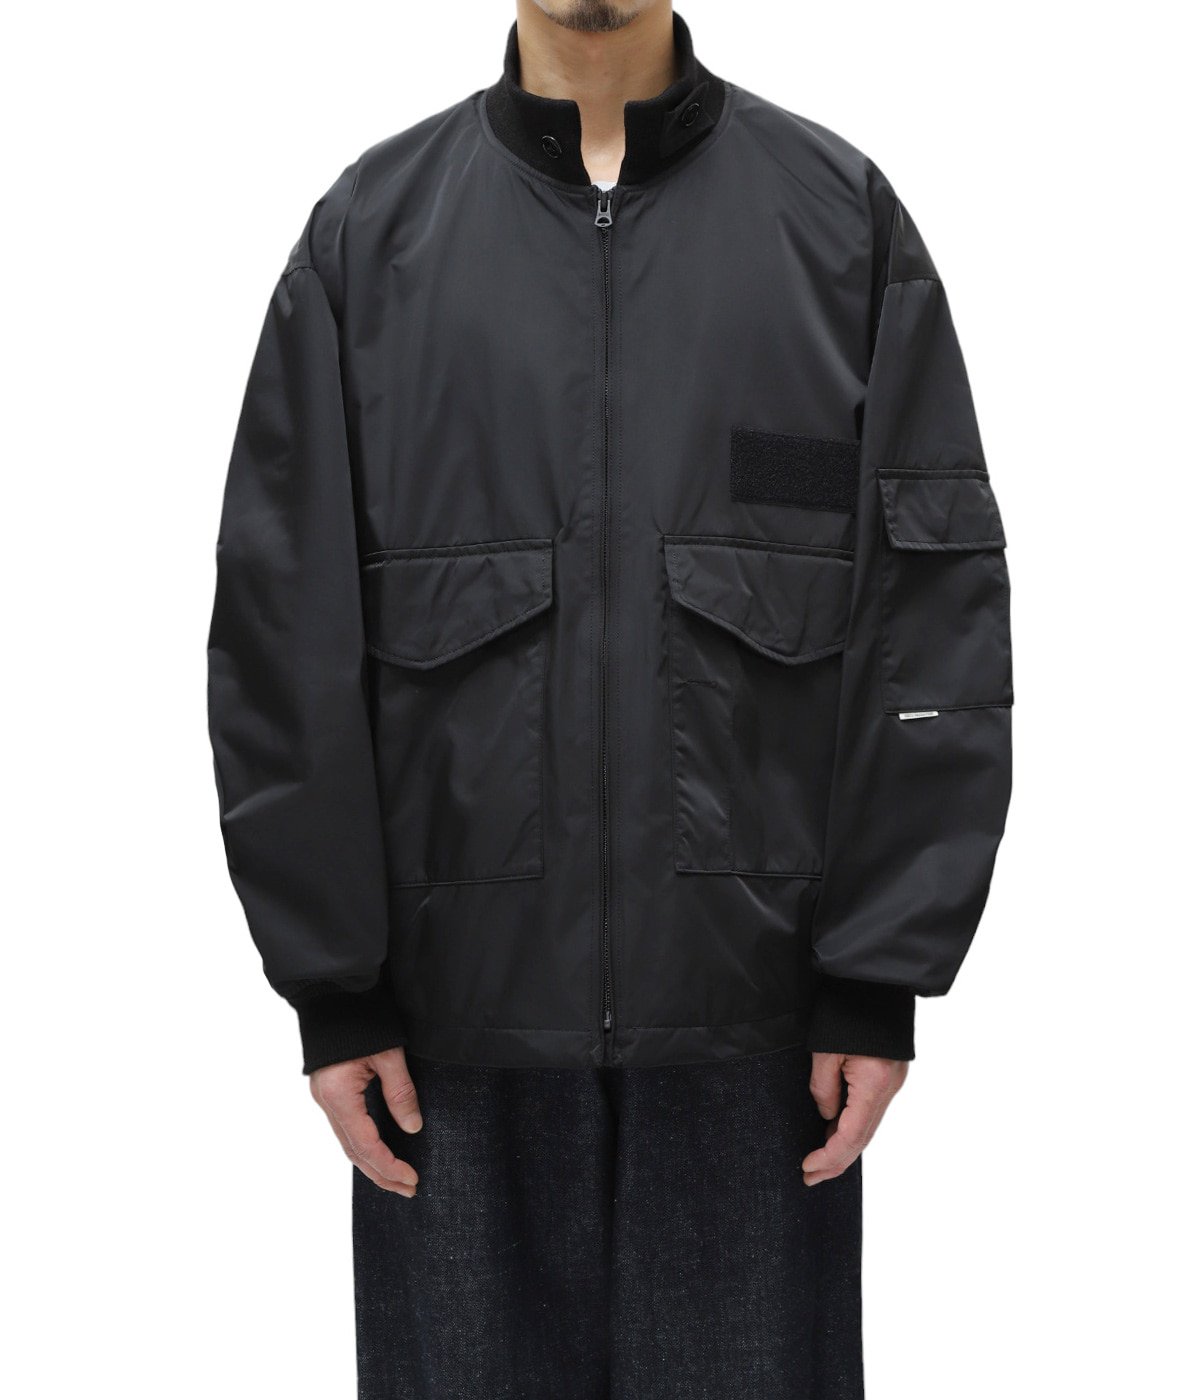 Memory Polyester Twill WEP Jacket | COOTIE PRODUCTIONS(クーティー